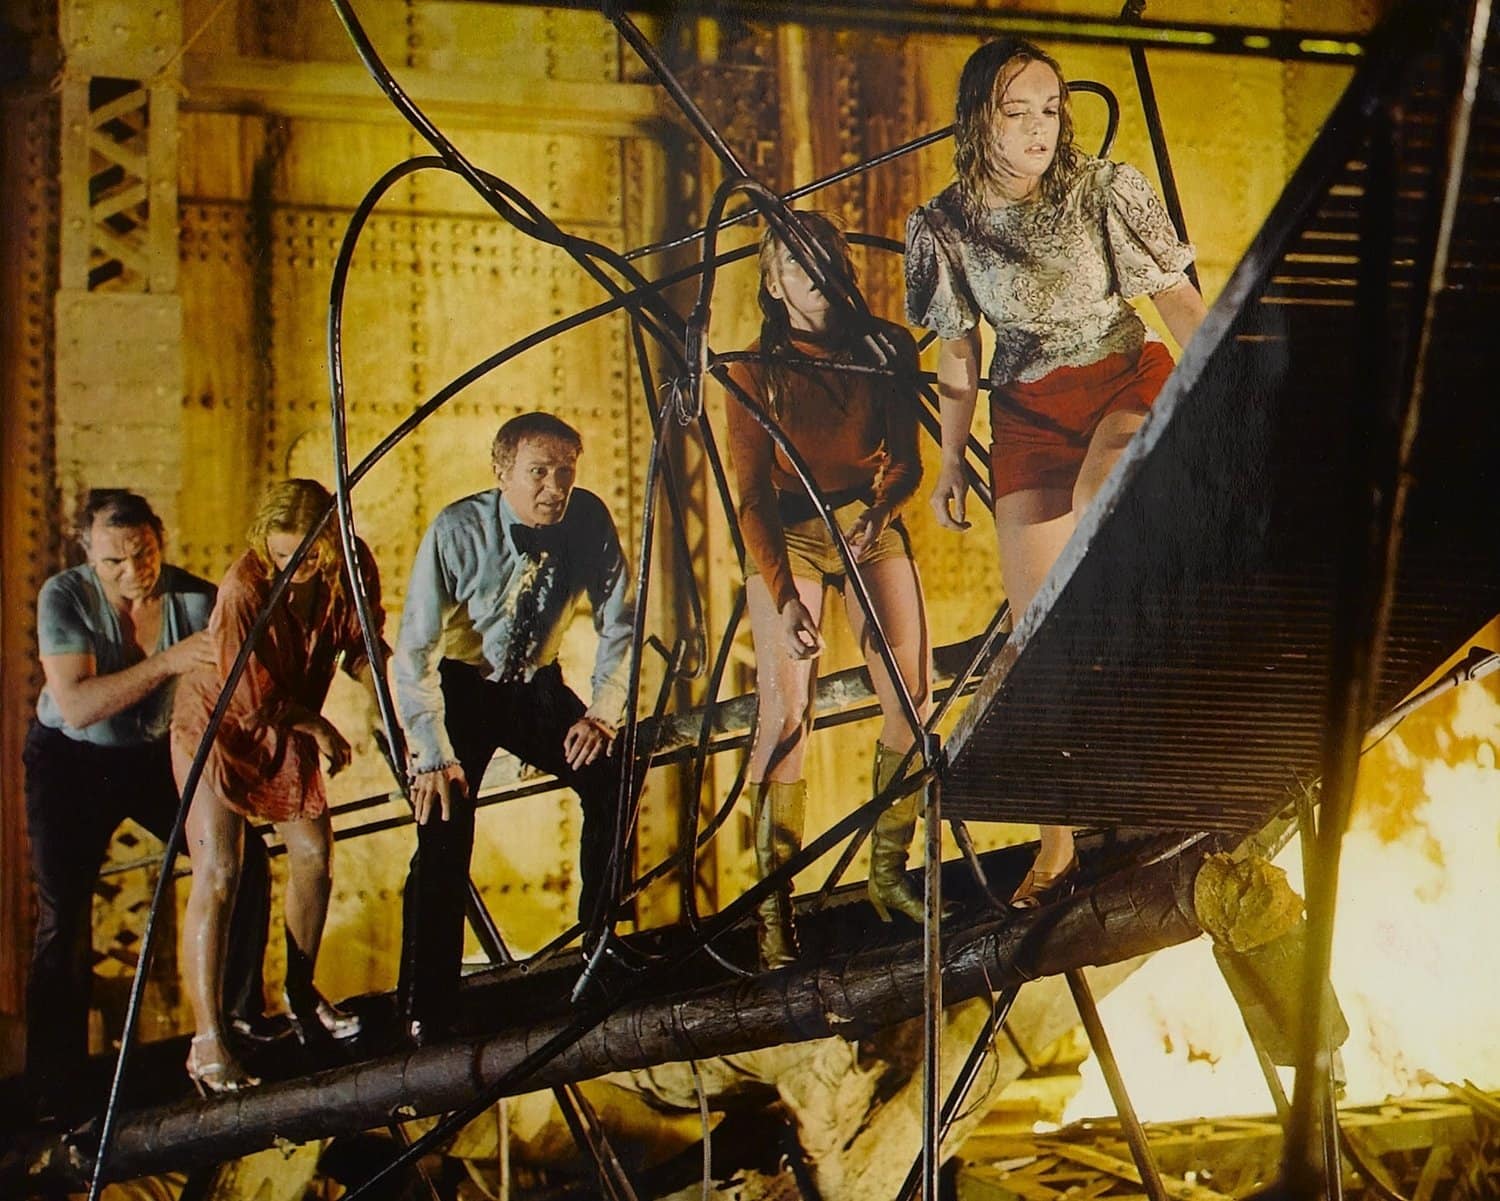 Ernest Borgnine, Stella Stevens, Red Buttons, Carol Lynley, and Pamela Sue Martin in the 1972 American disaster film The Poseidon Adventure